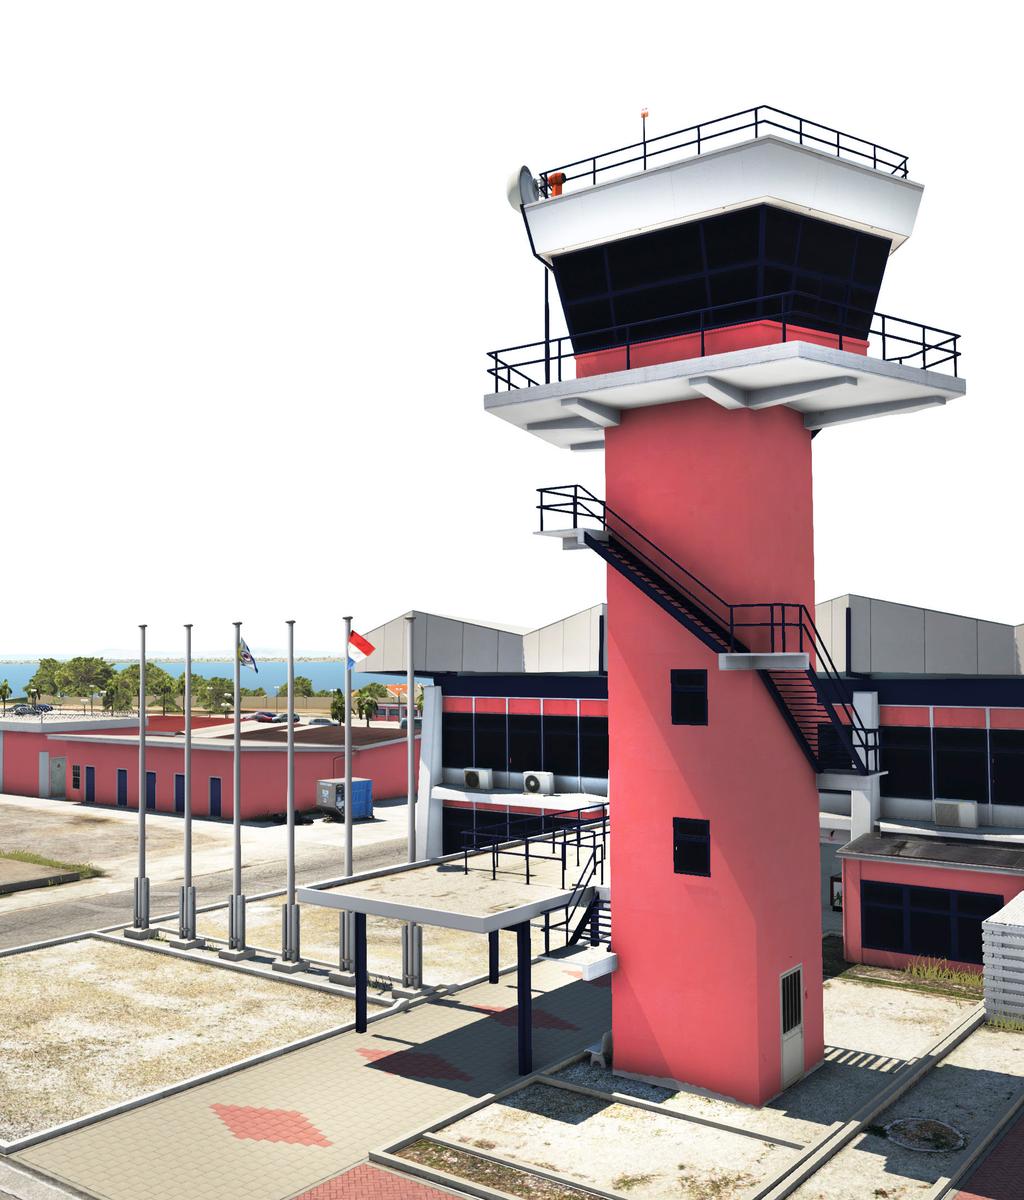 ADD-ON FOR BONAIRE Flamingo AIRPORT